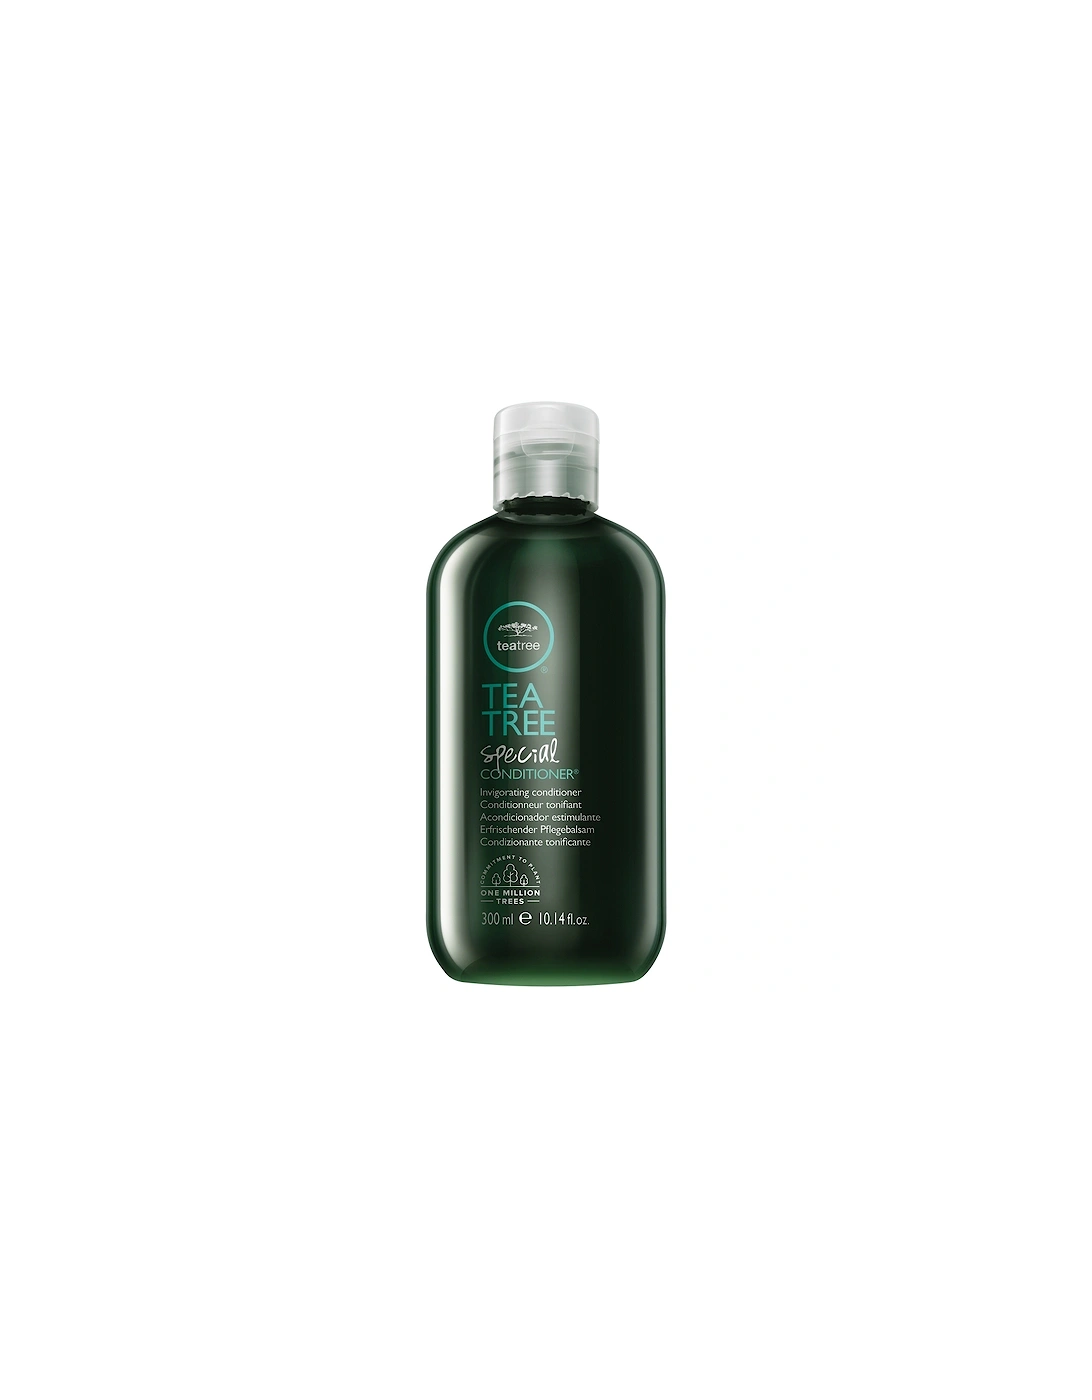 Tea Tree Special Conditioner 300ml - Paul Mitchell, 2 of 1